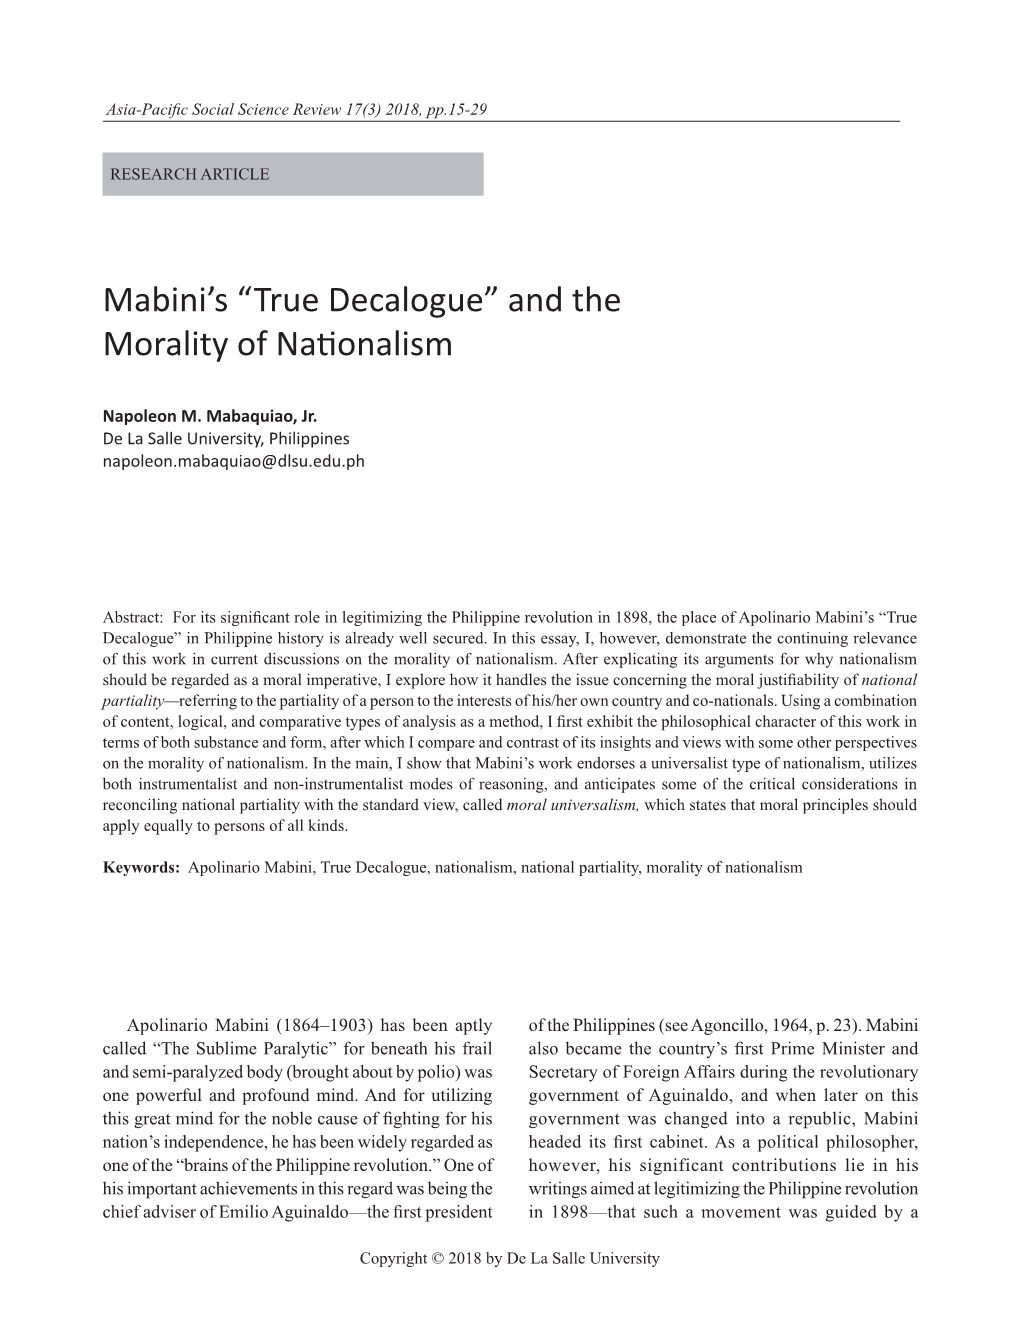 Mabini's “True Decalogue” and the Morality of Nationalism